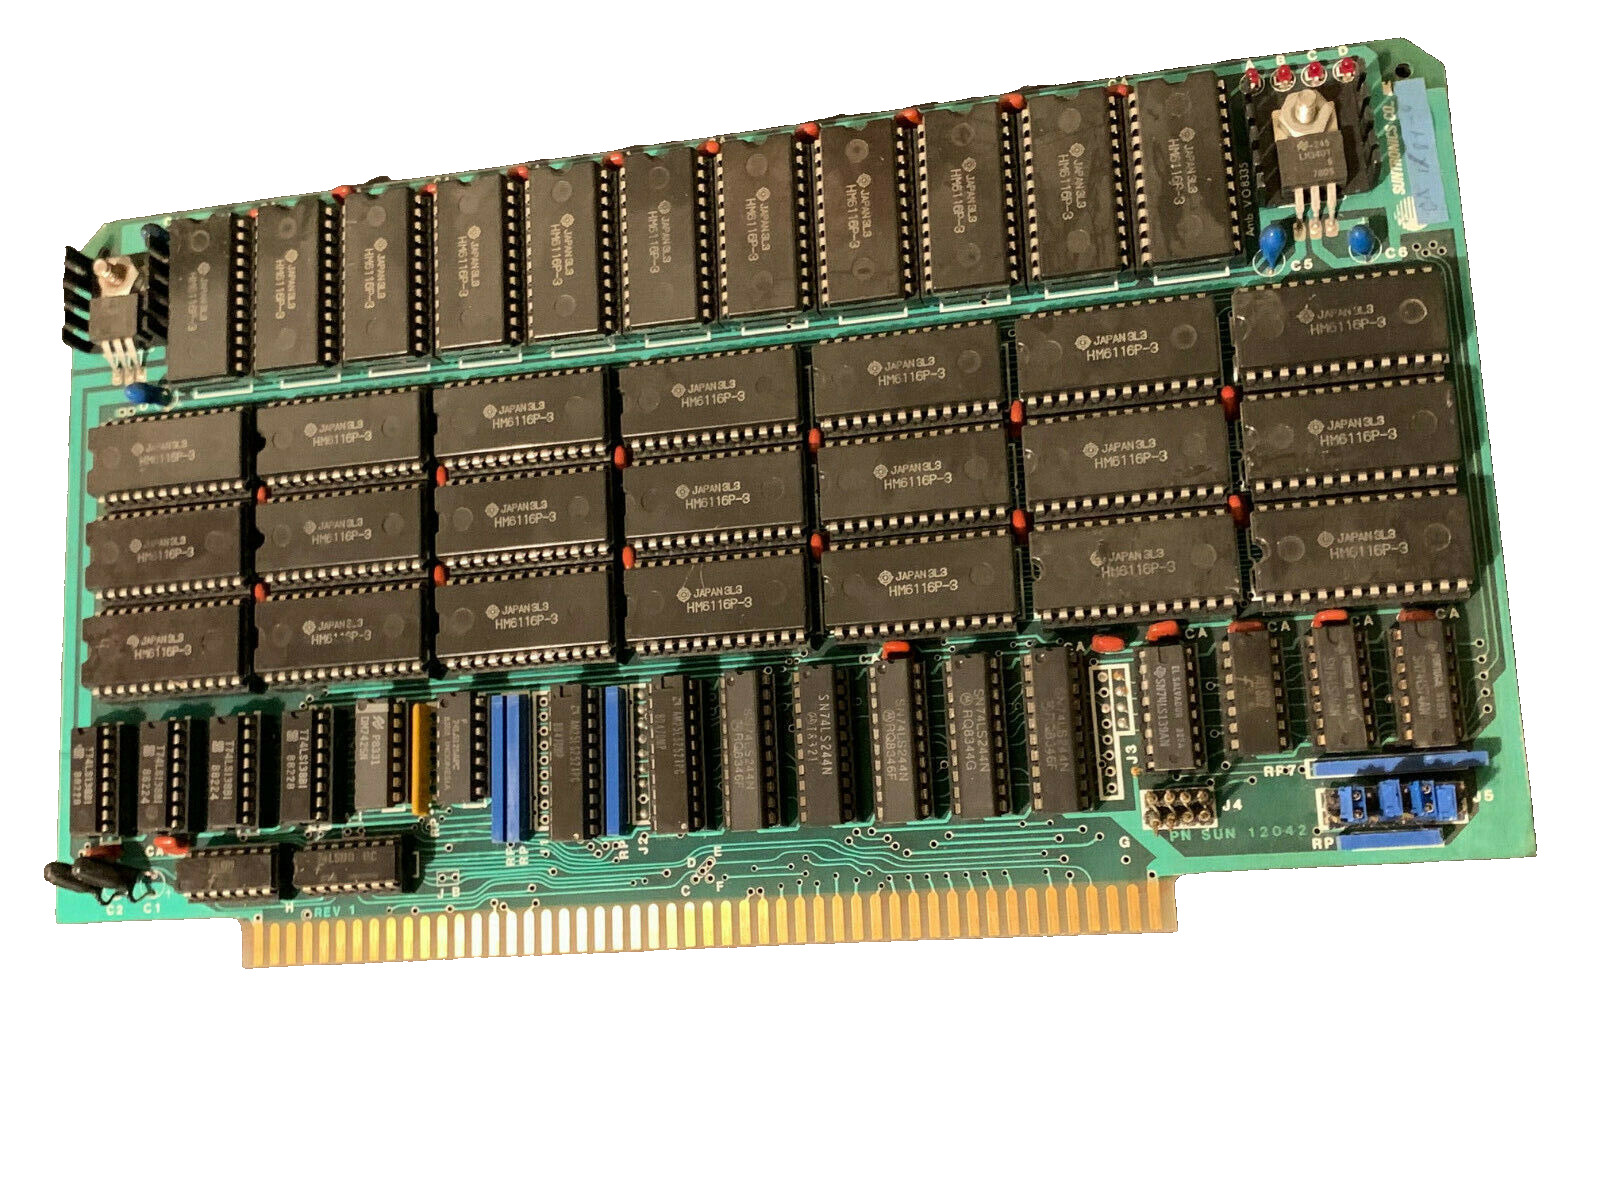 S-100 ALTAIR MITS Static RAM Memory Board VINTAGE (32) HM6116-3 IC\'S SOCKETED